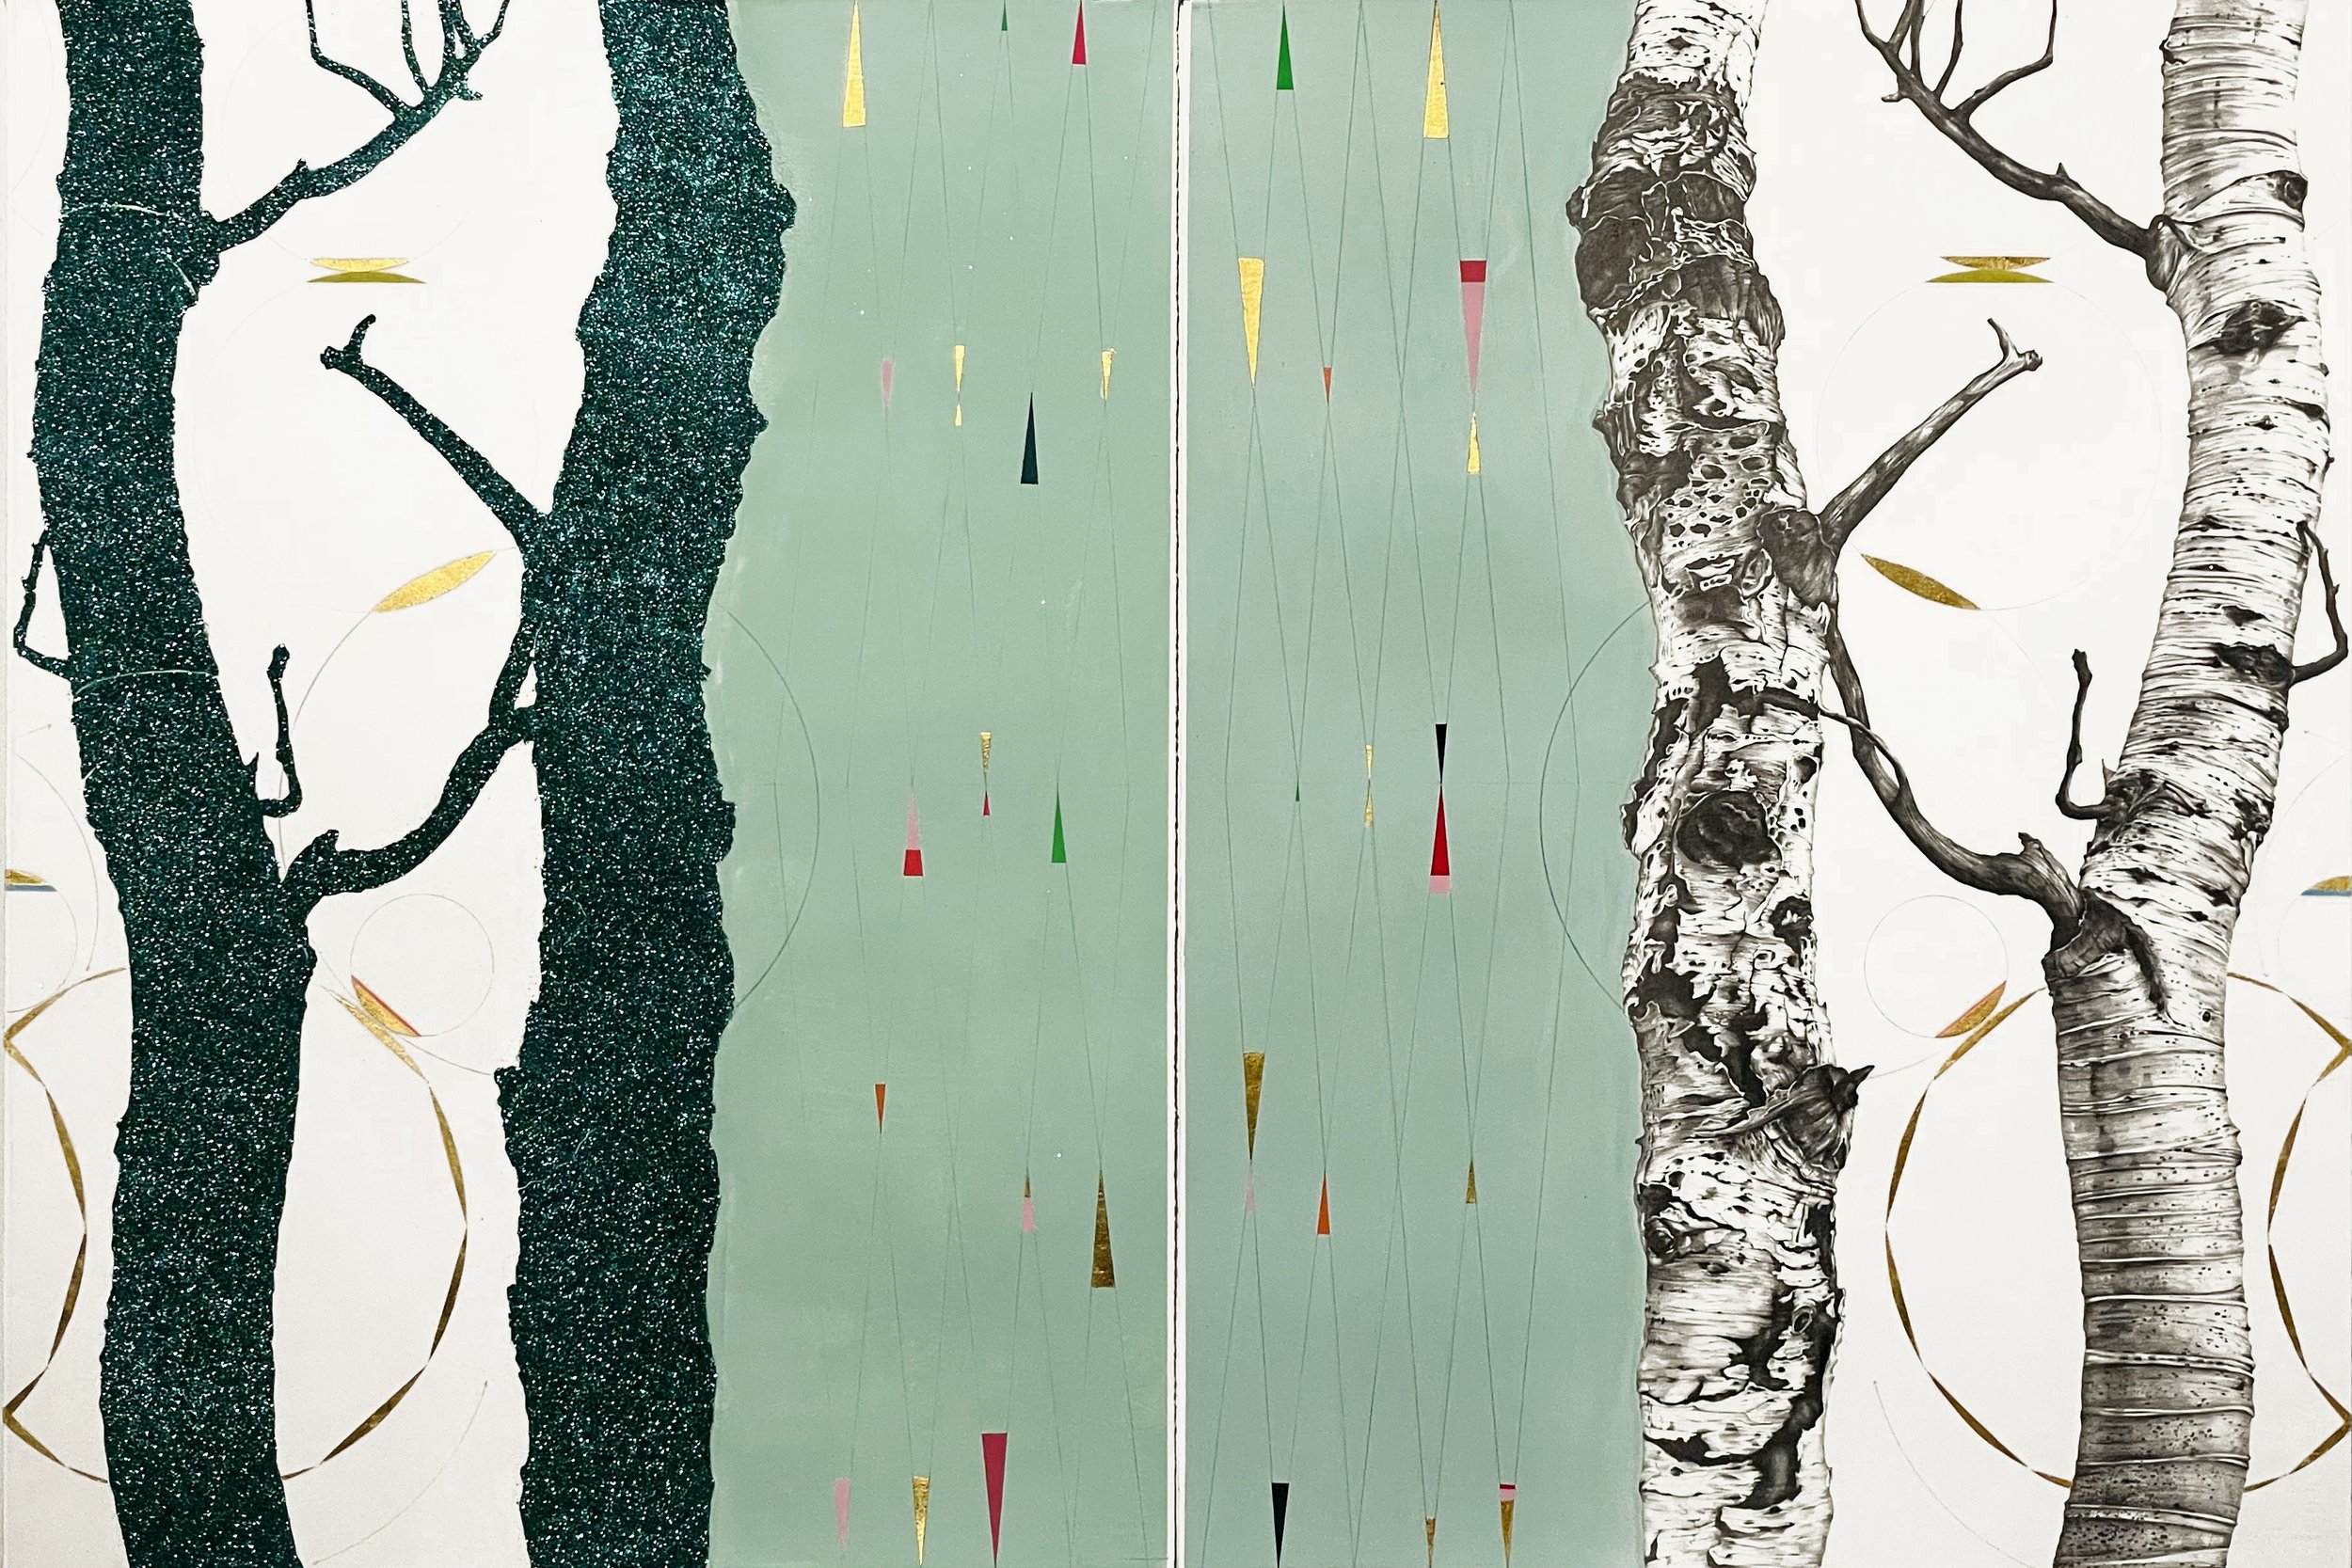 BIRCH - TWO VIEWS | 30 x 45 inches / 76.2 x 114.3 cm, graphite, acrylic, gold leaf, glitter on paper, 2022